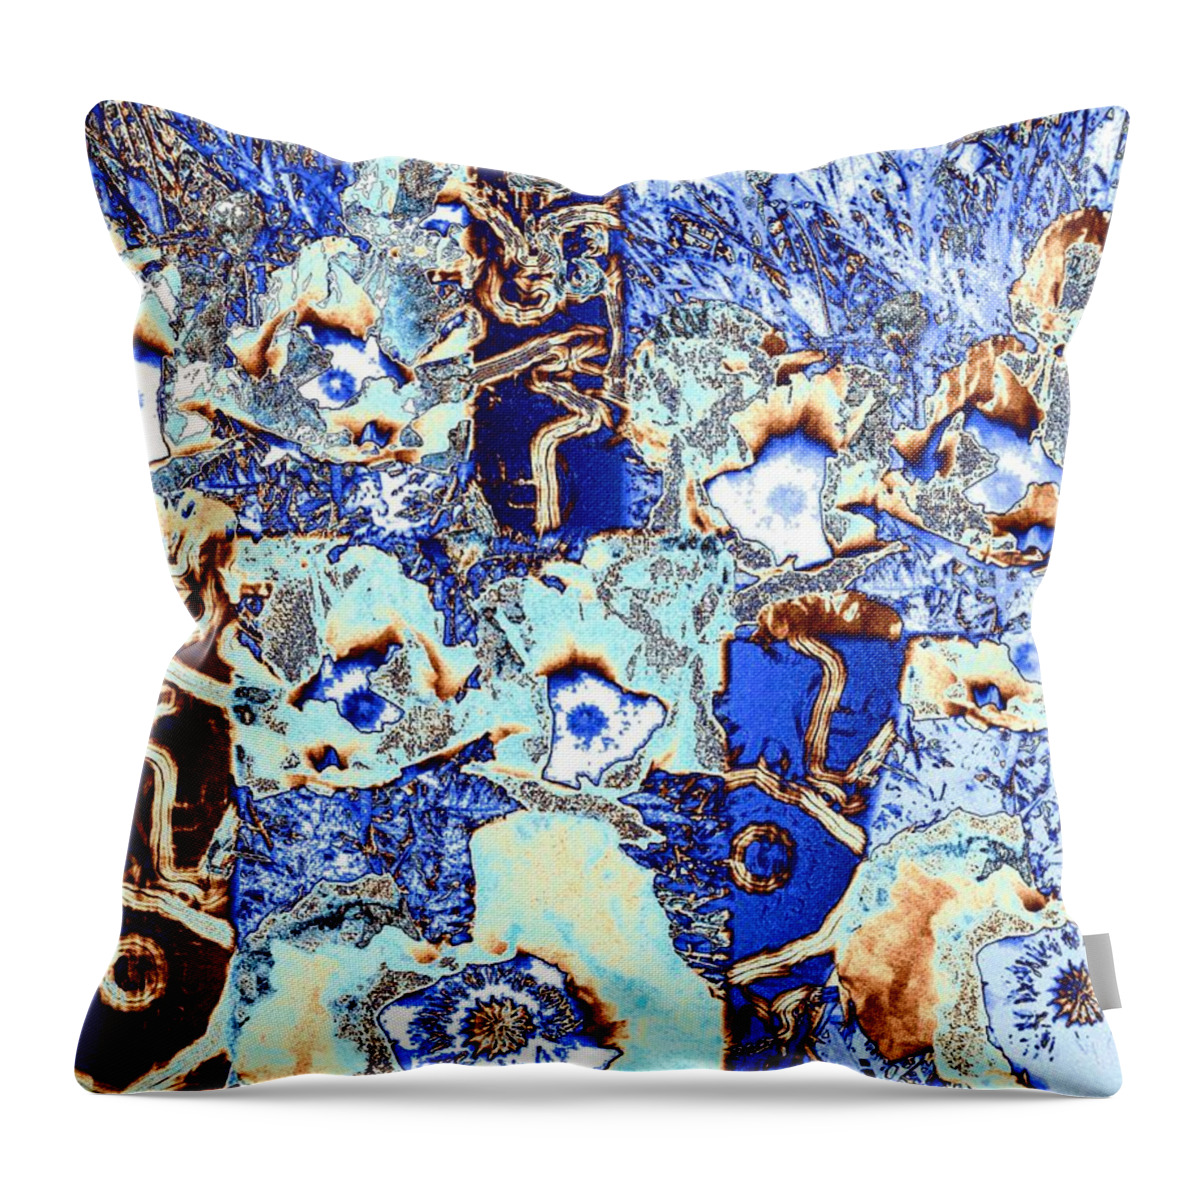  Throw Pillow featuring the digital art Abstract Fusion 2 by Will Borden